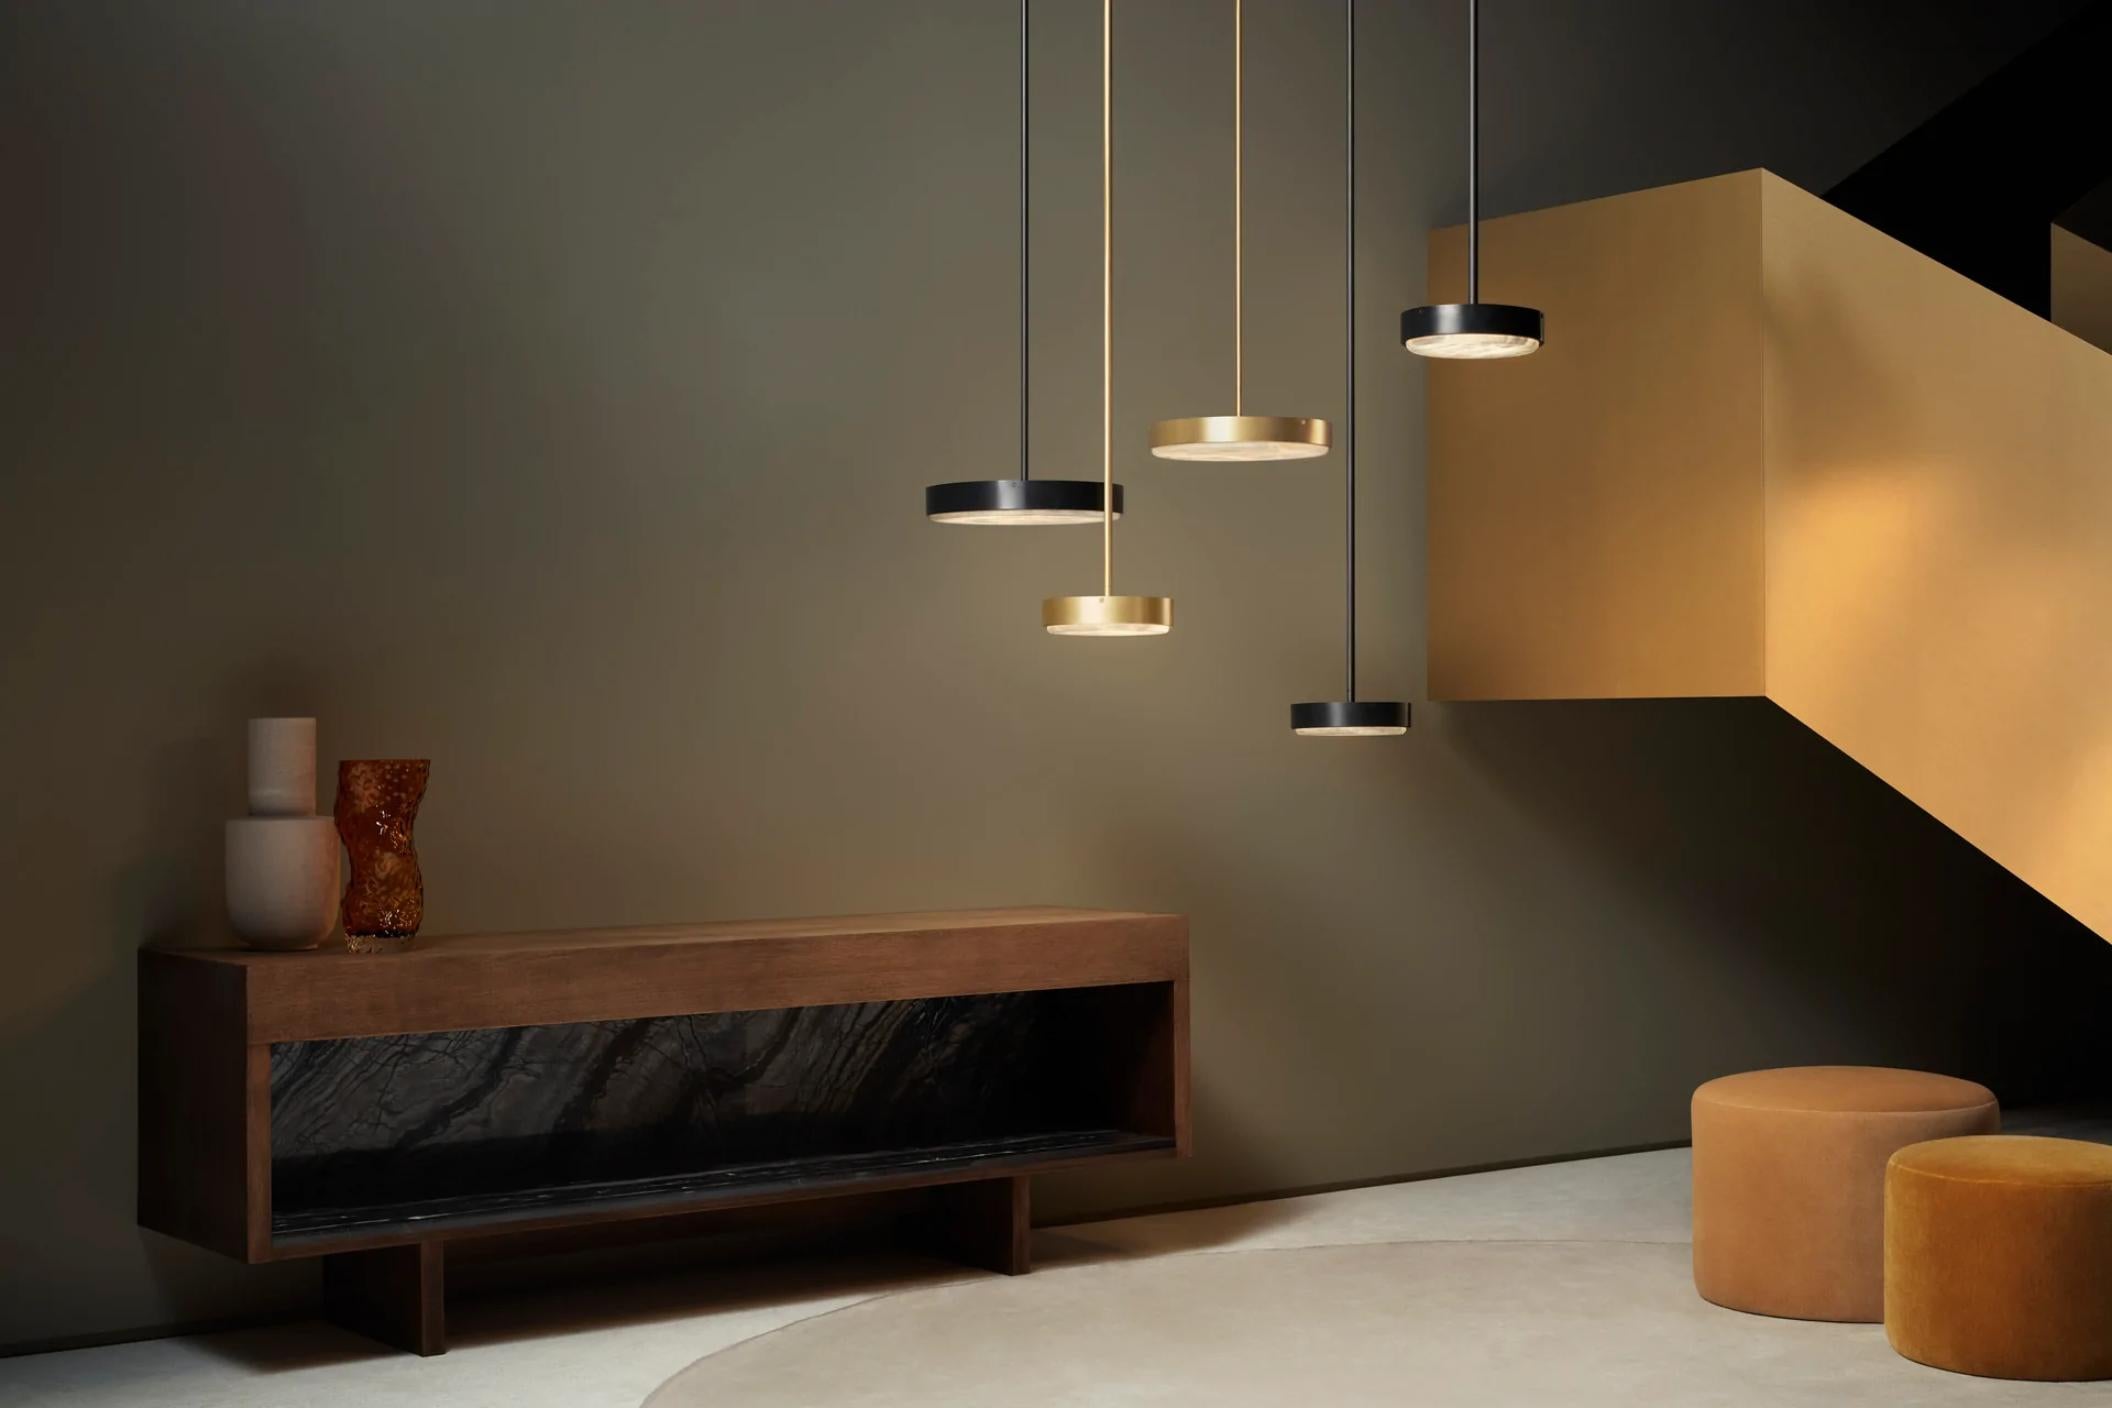 Anvers large pendant by CTO lighting.
Materials: satin brass with alabaster stone
Also available in bronze with alabaster stone
Dimensions: H 6.8 x W 54.5 cm 

All our lamps can be wired according to each country. If sold to the USA it will be